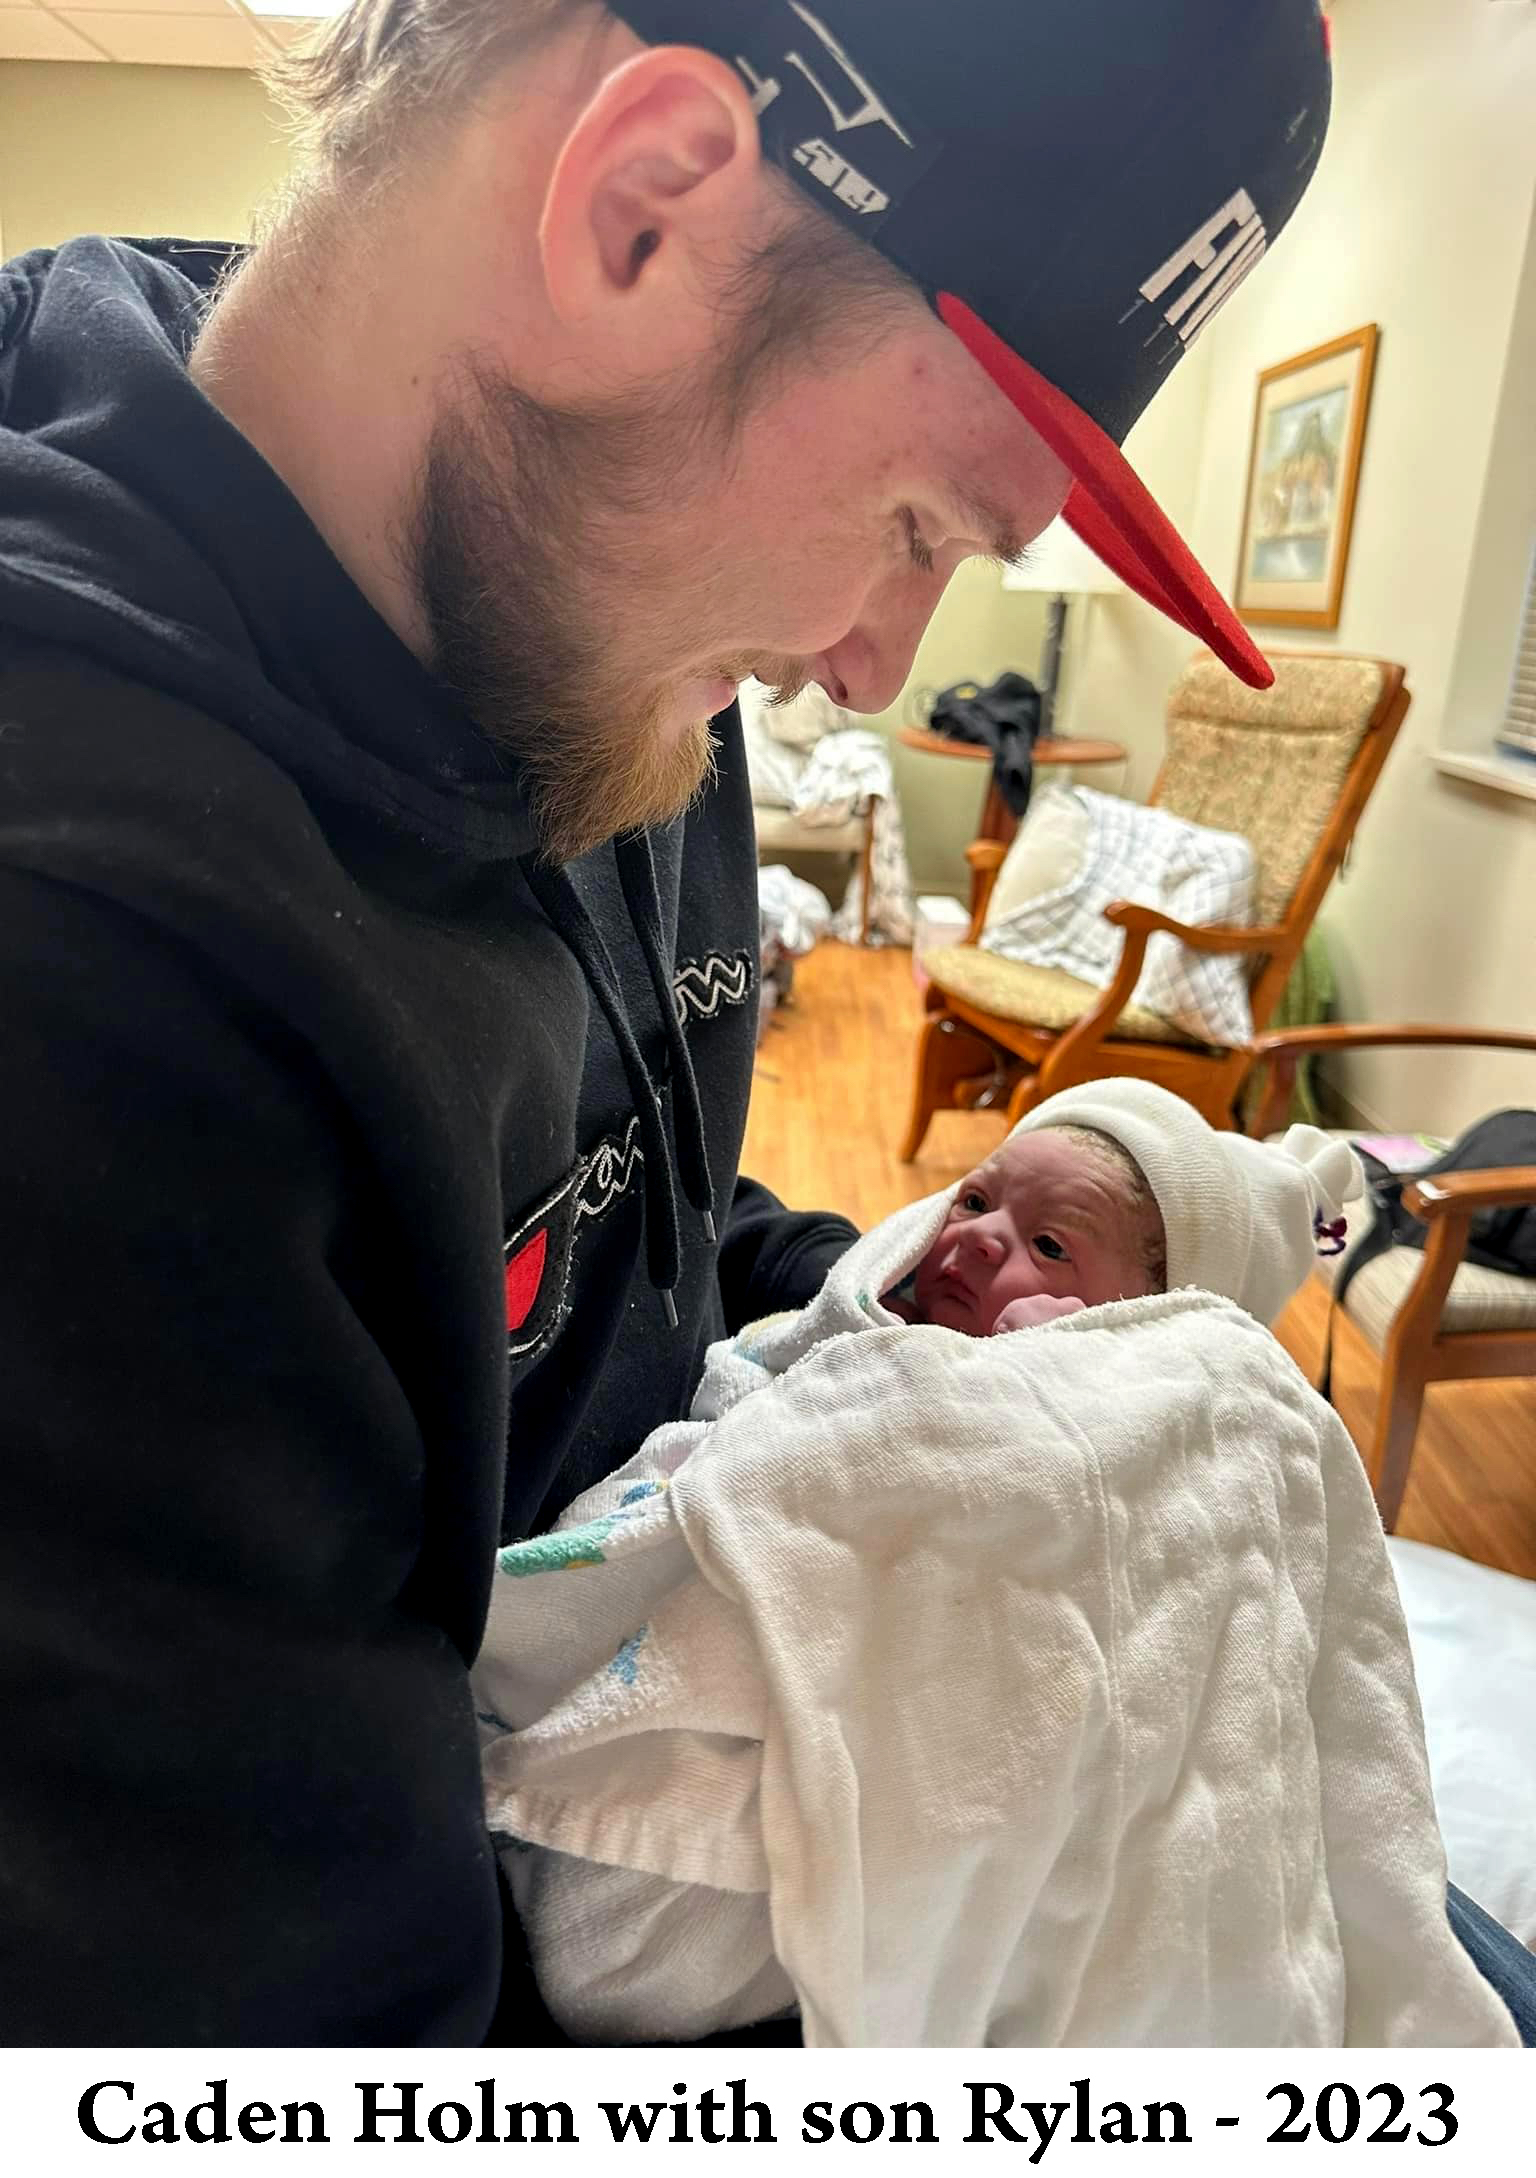 Caden Holm is holding his son Rylan and gazing down on him 